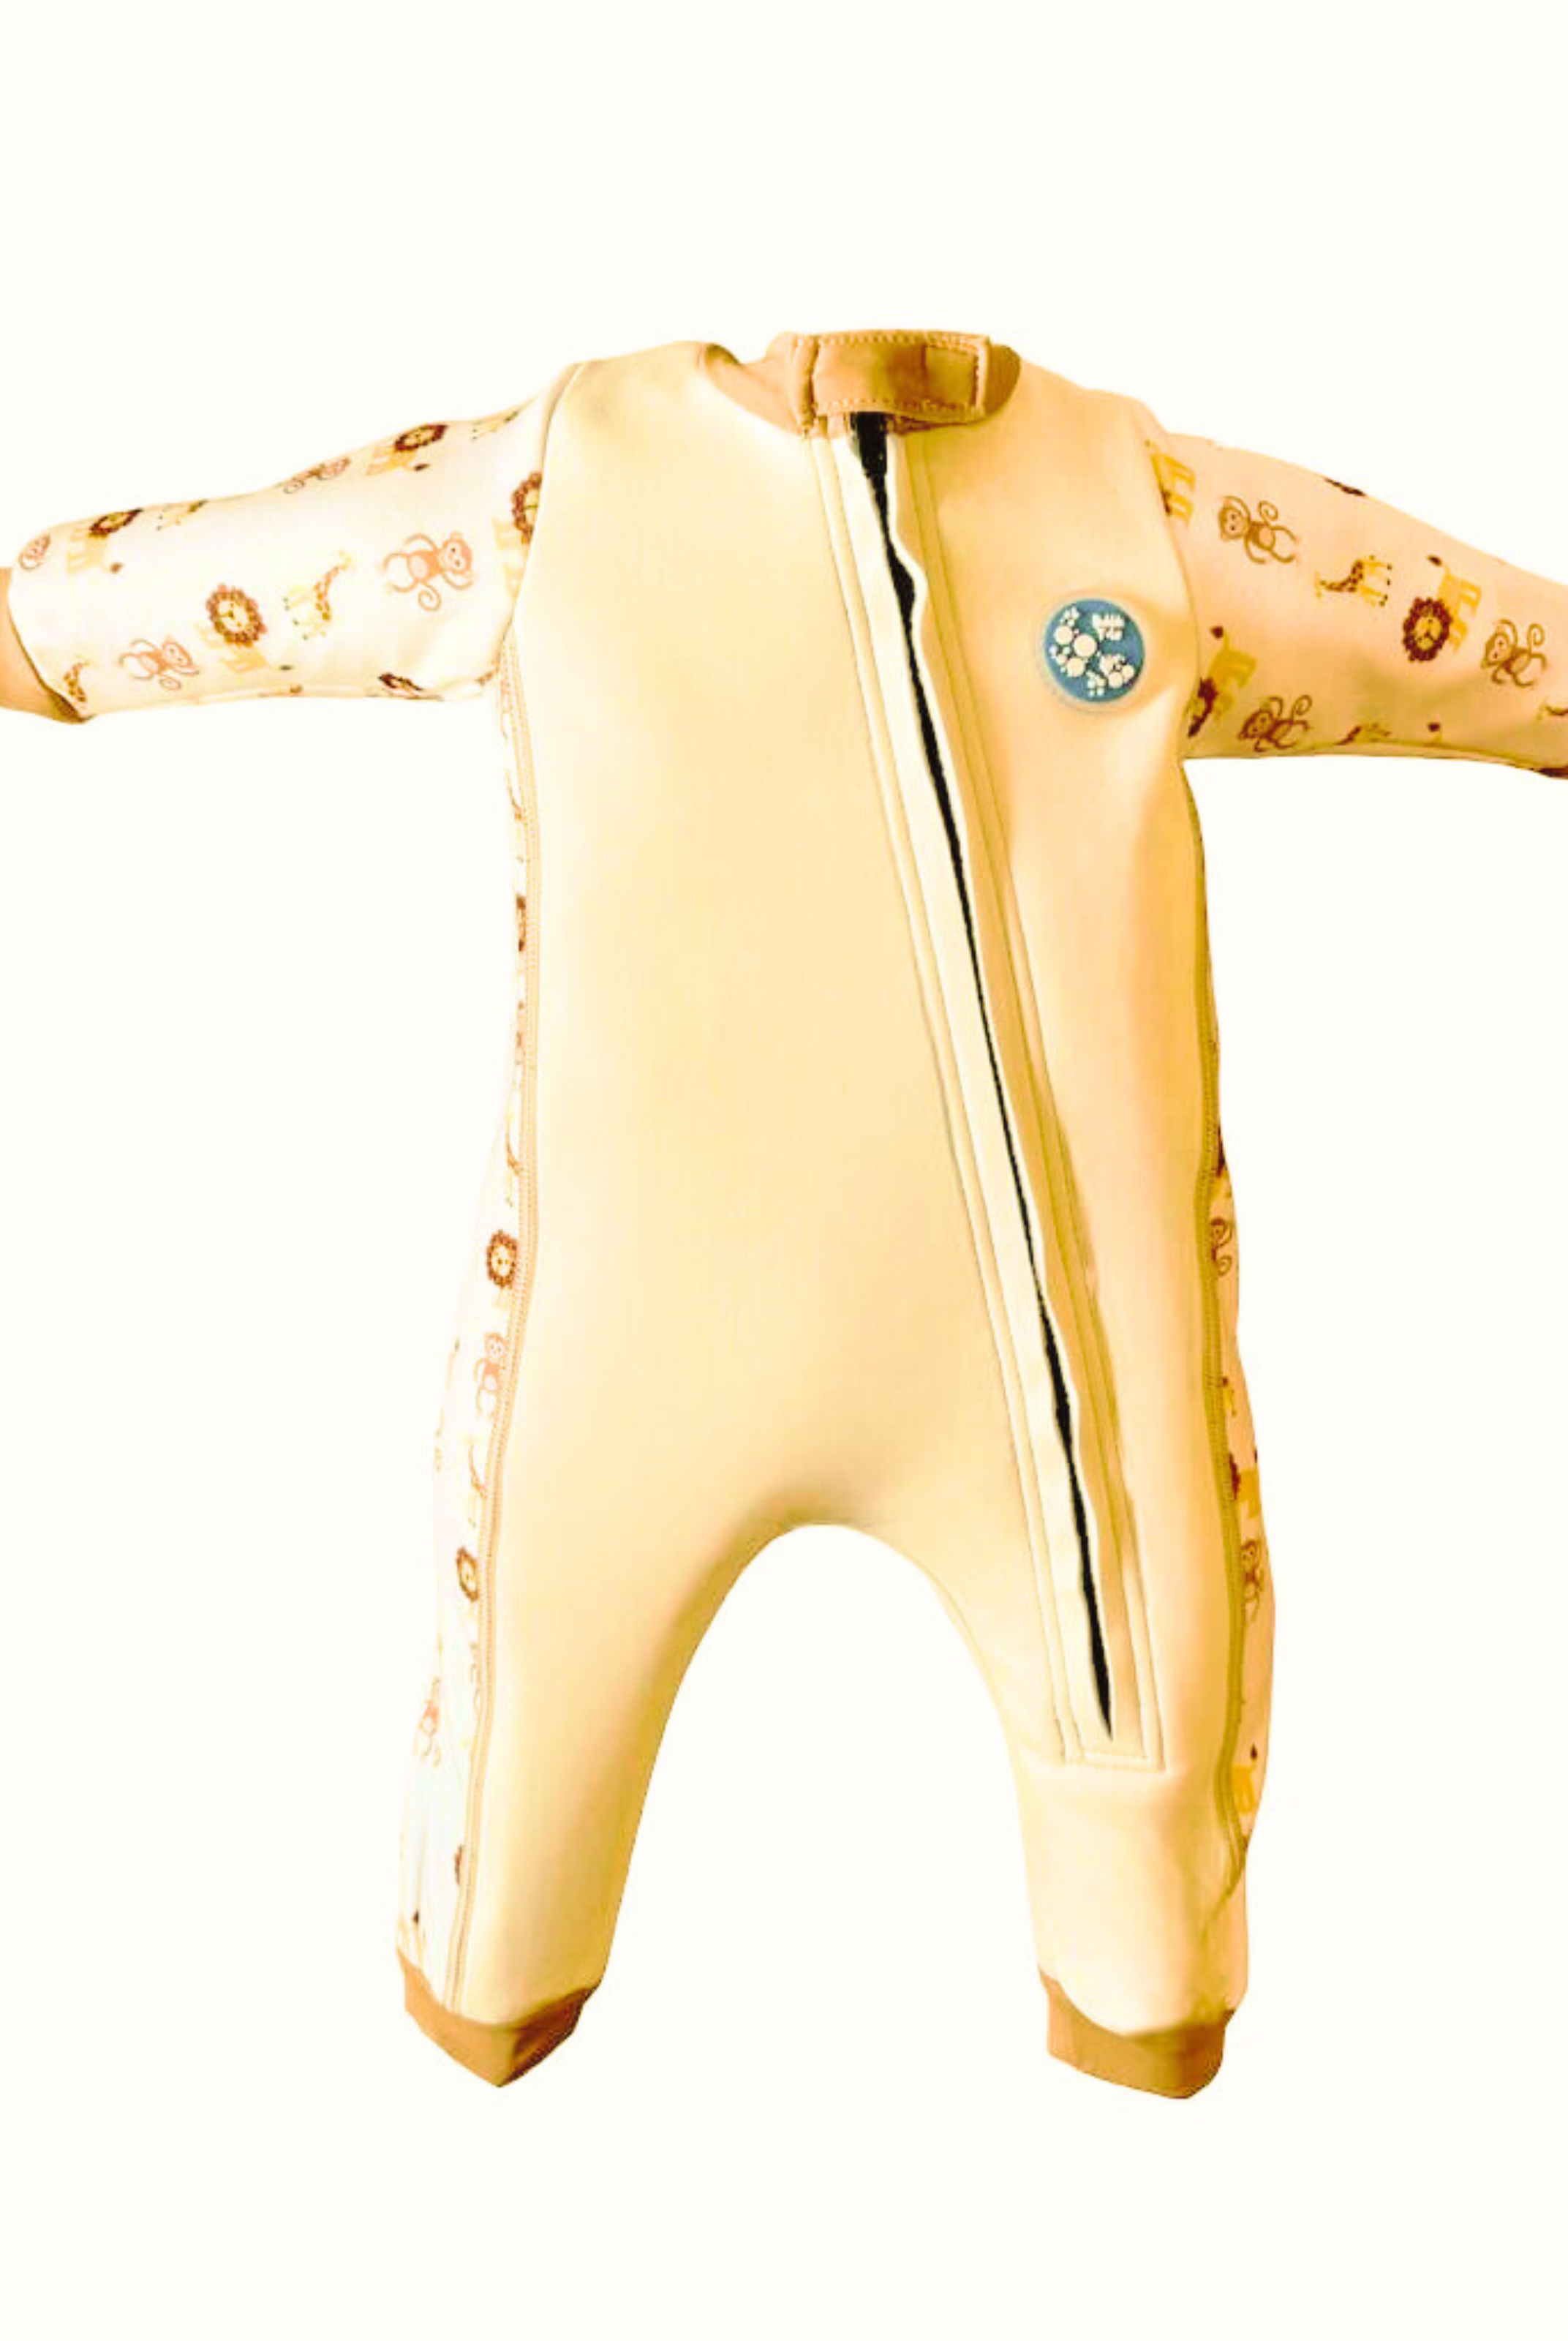 An image of the Bubble Tots Easy Zip Thermal Swimsuit in Yellow Beige Safari design. The design features playful Lions, Monkeys and Giraffes. The background colour is a soothing neutral tone with pops of vibrant Safari Animal illustrations